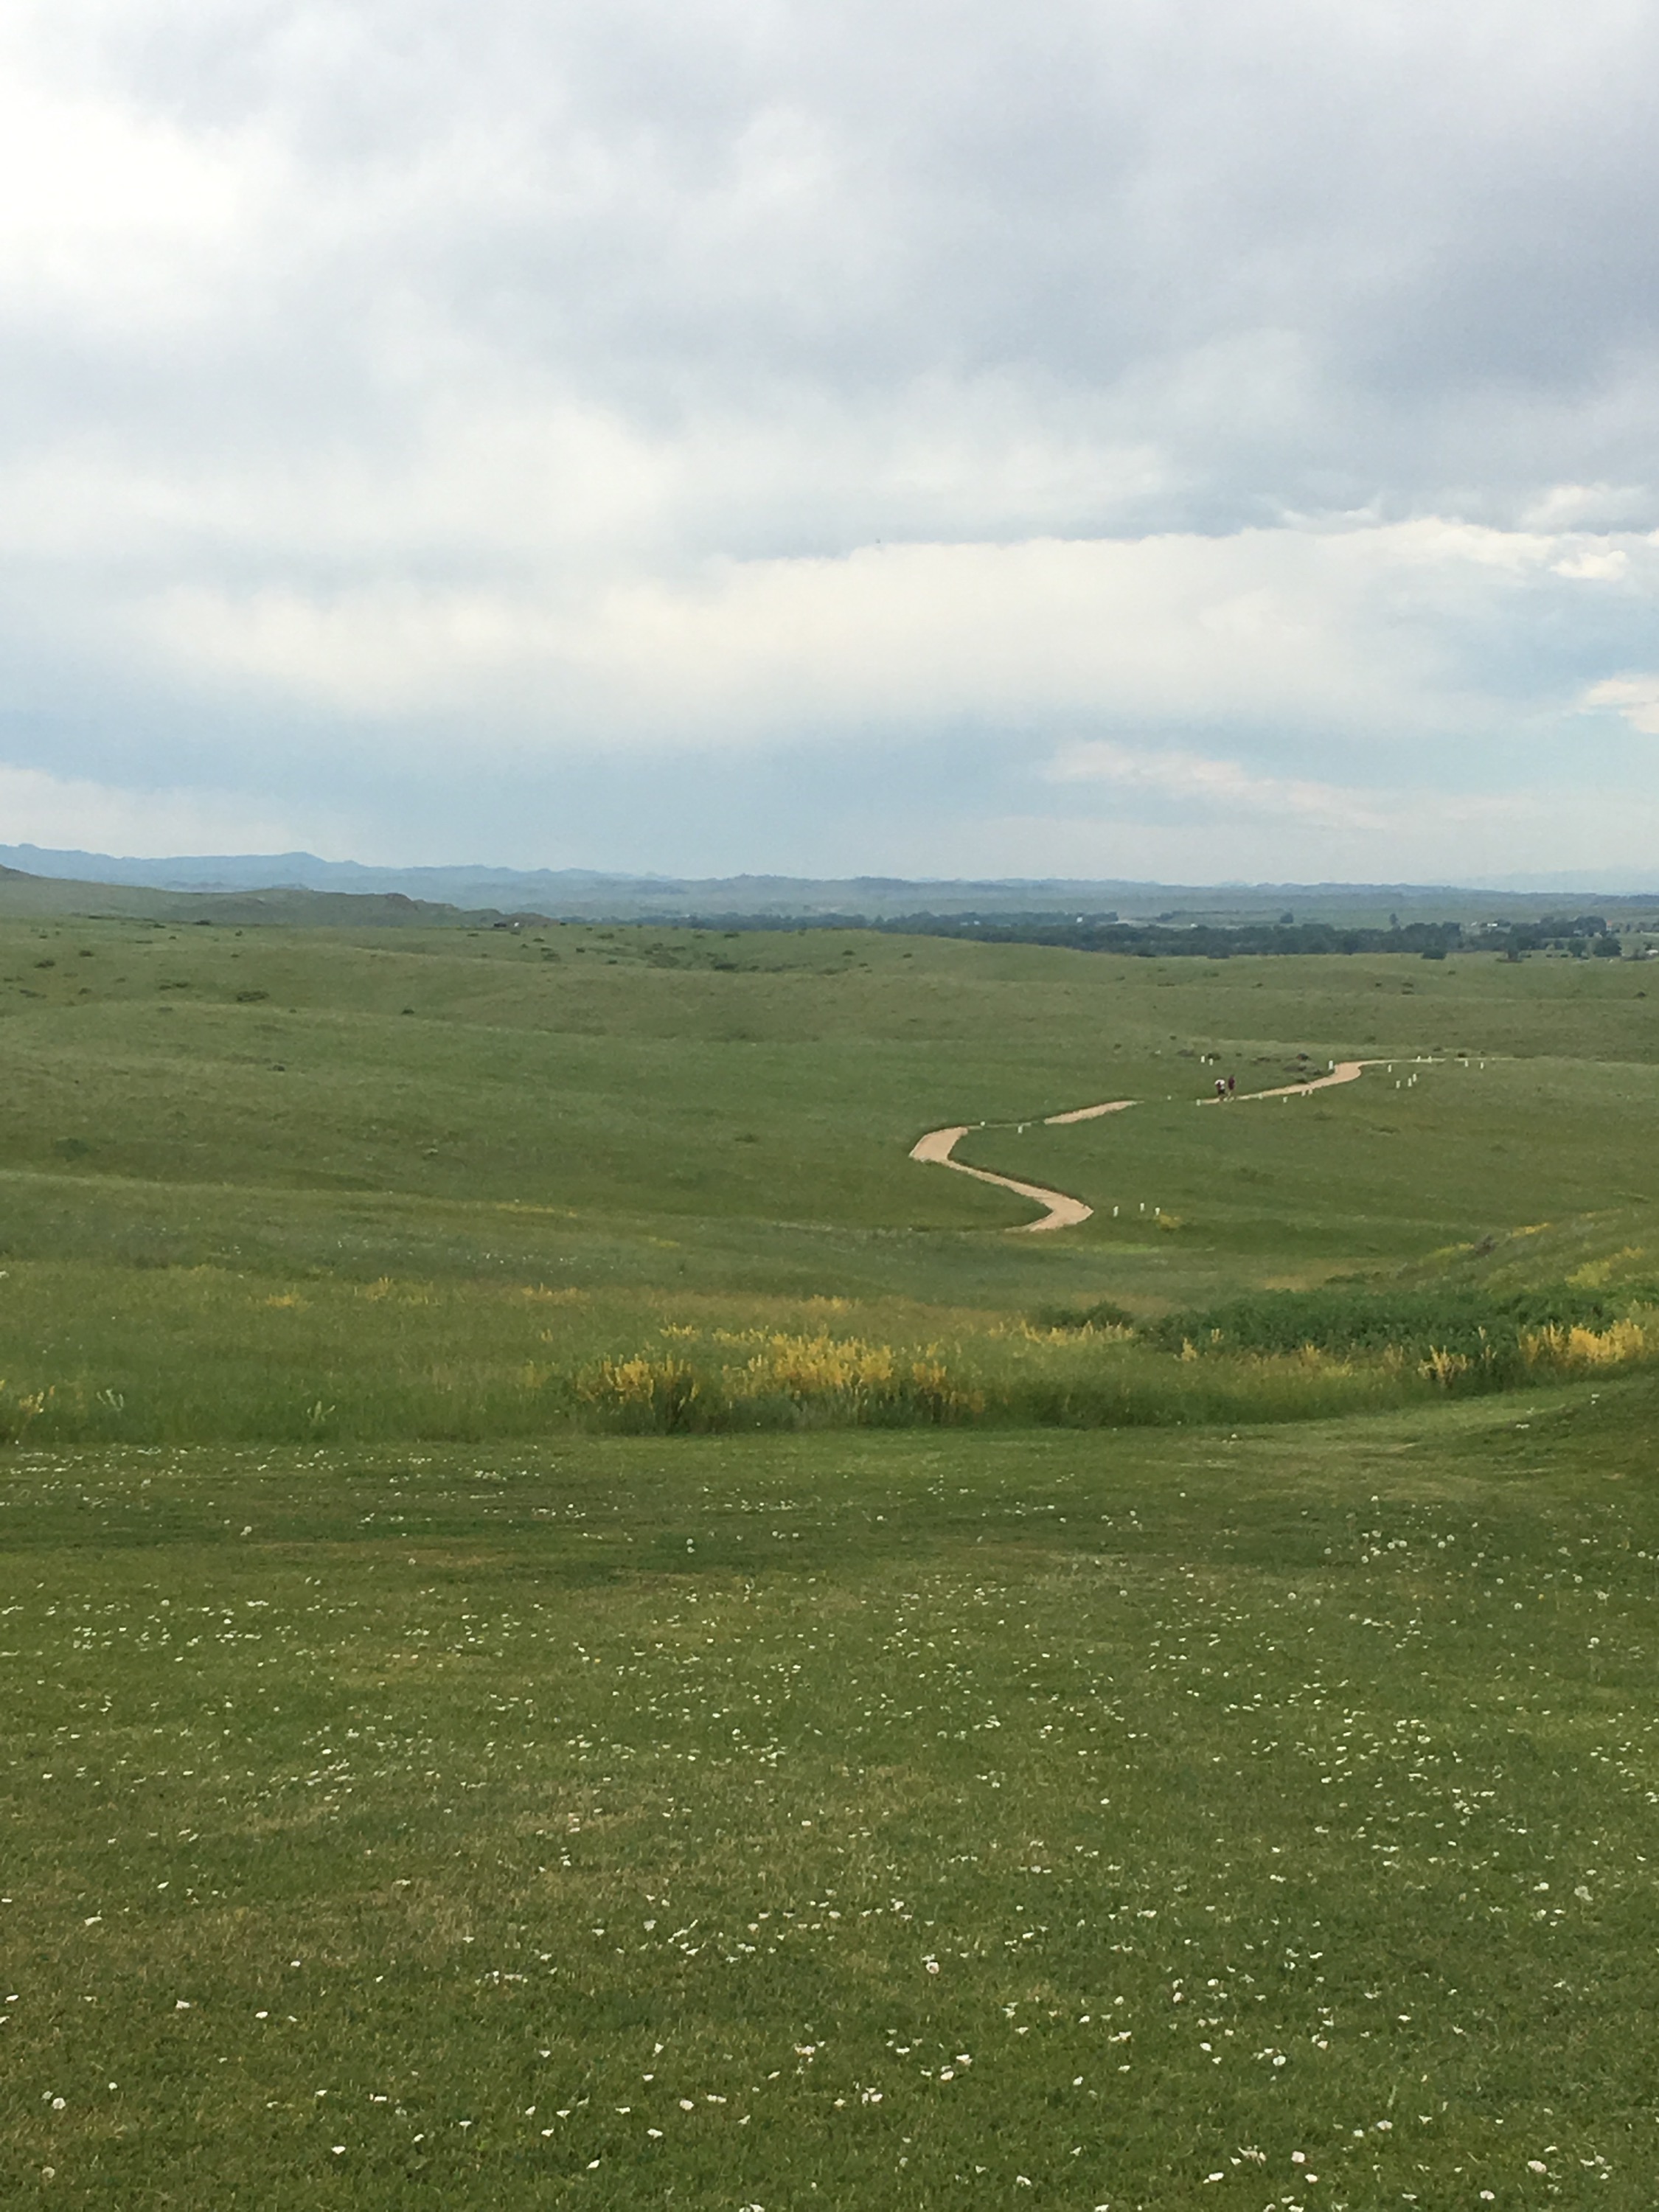 Adventure Van Travels – Middle Fork Campground and Little Bighorn Battlefield National Monument